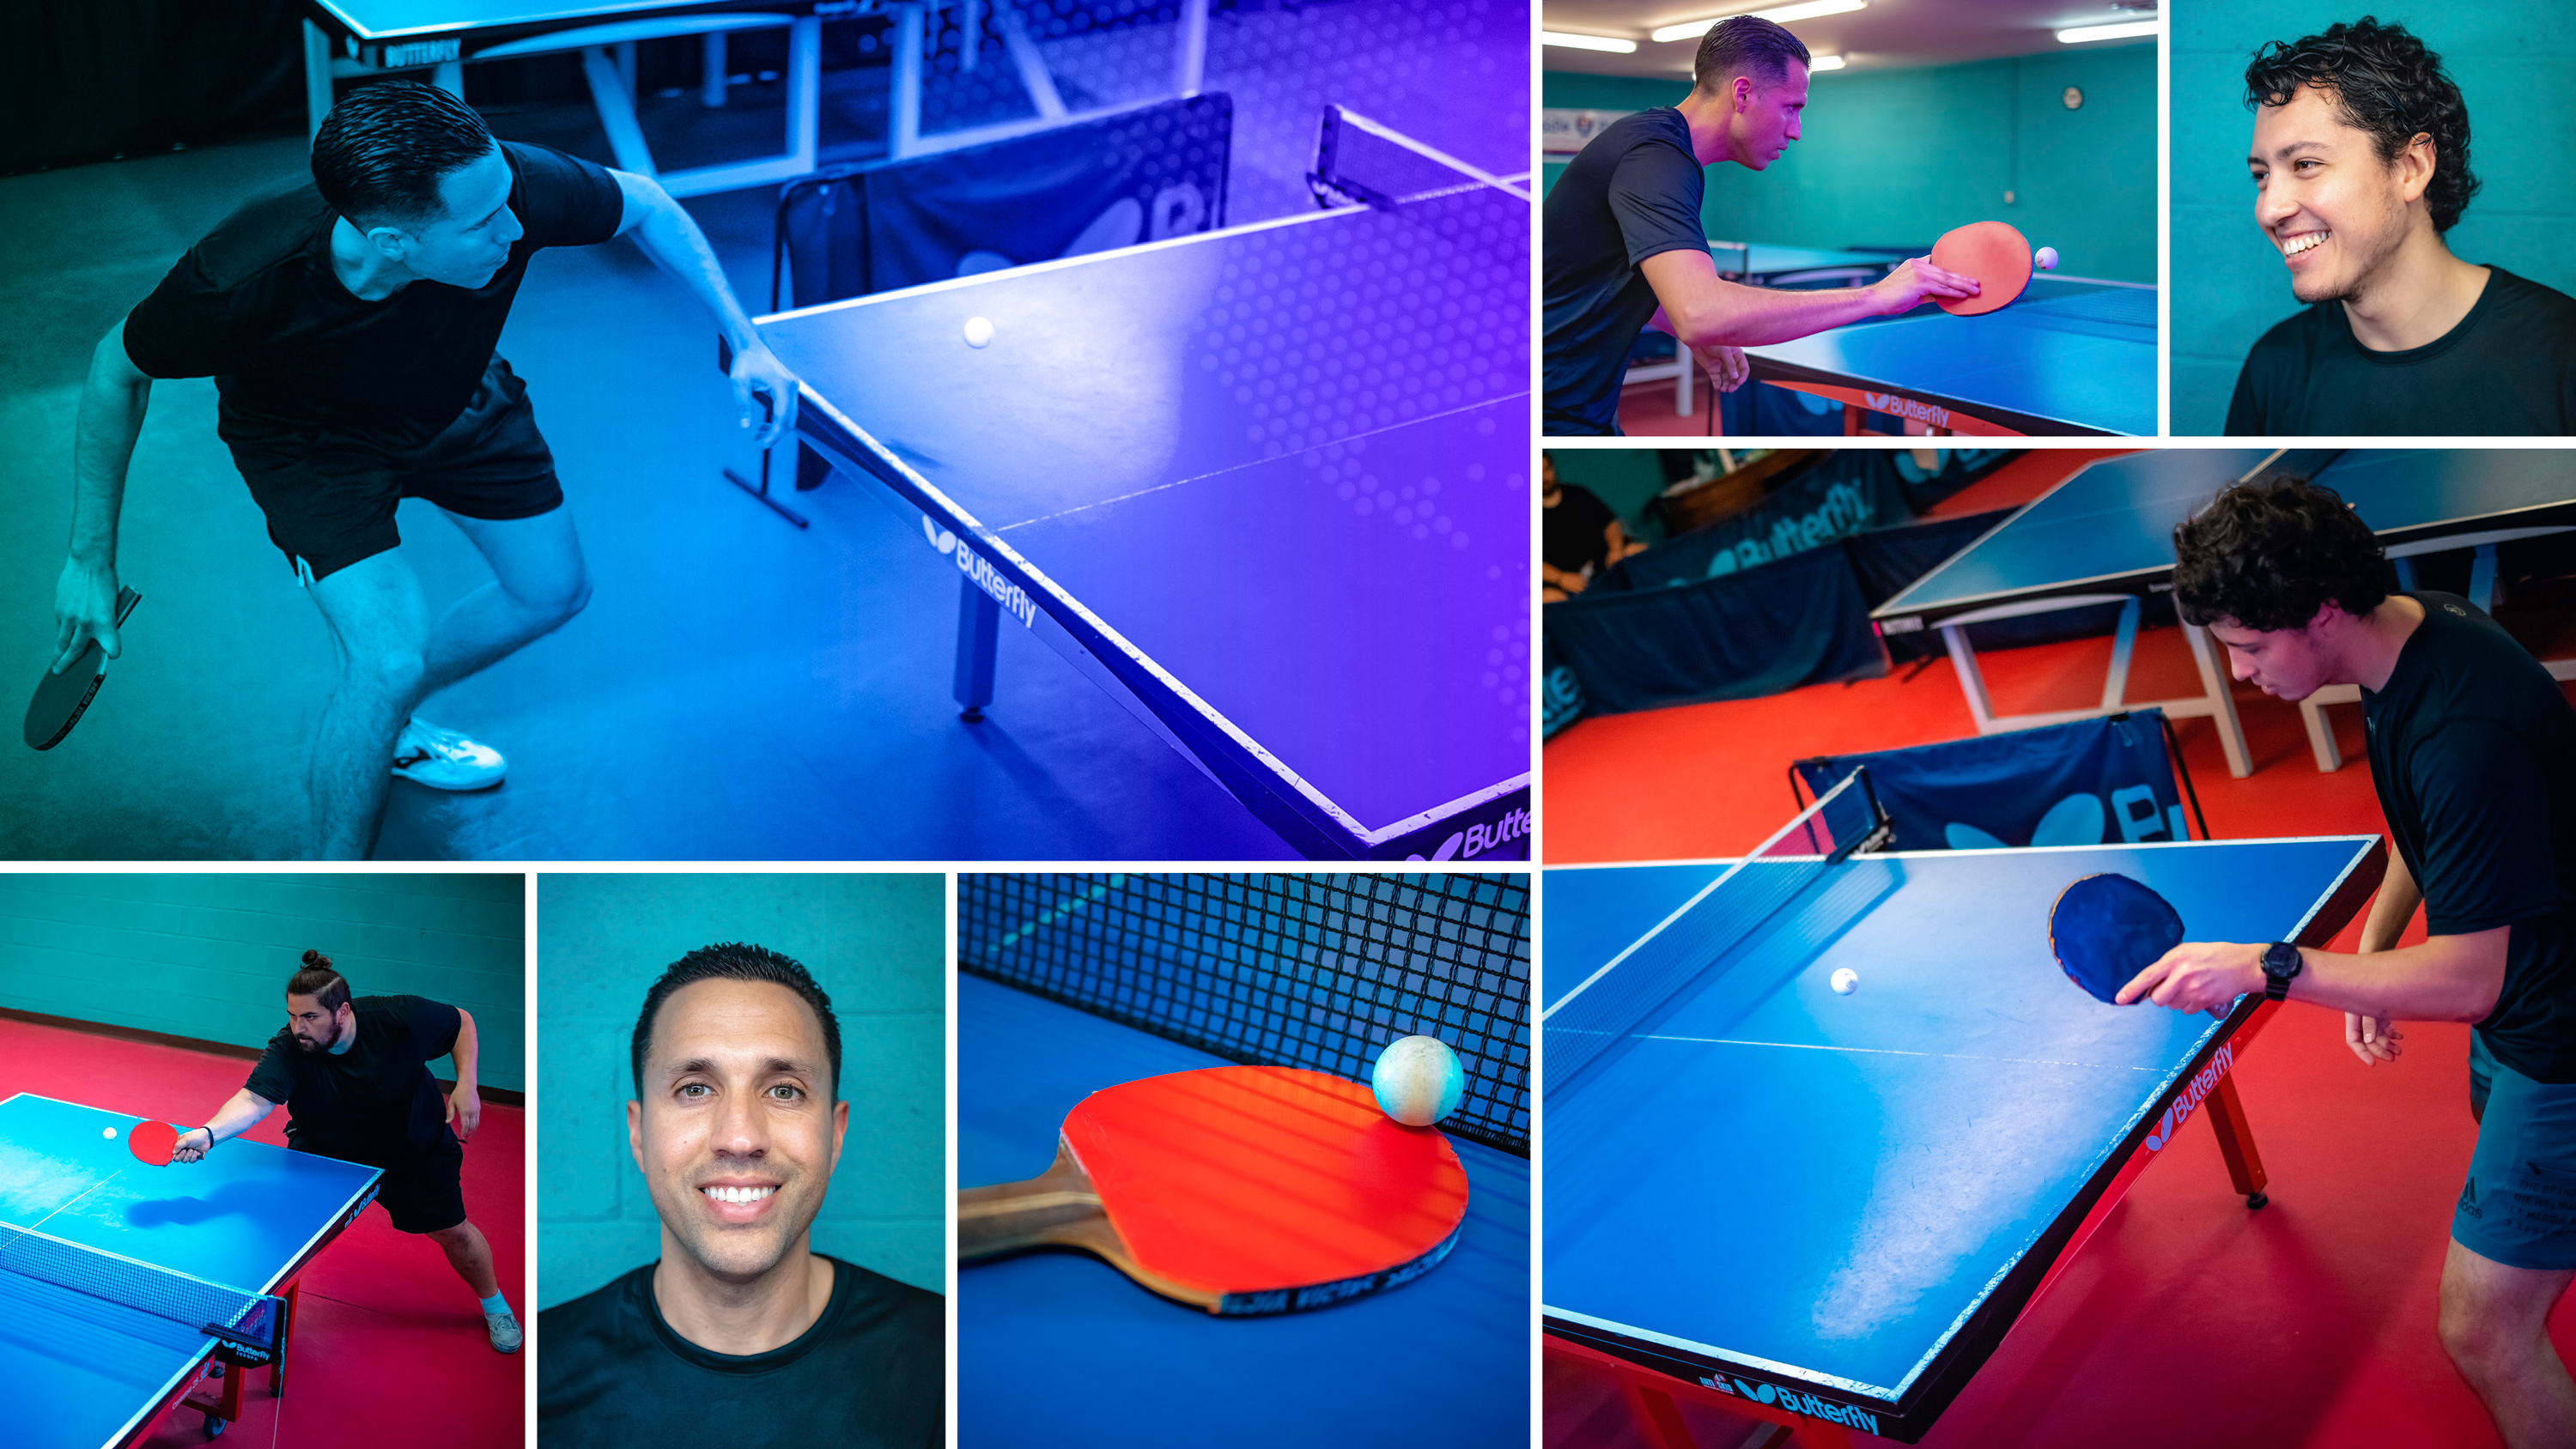 featured image five:American Table Tennis Association Brand Identity & Website